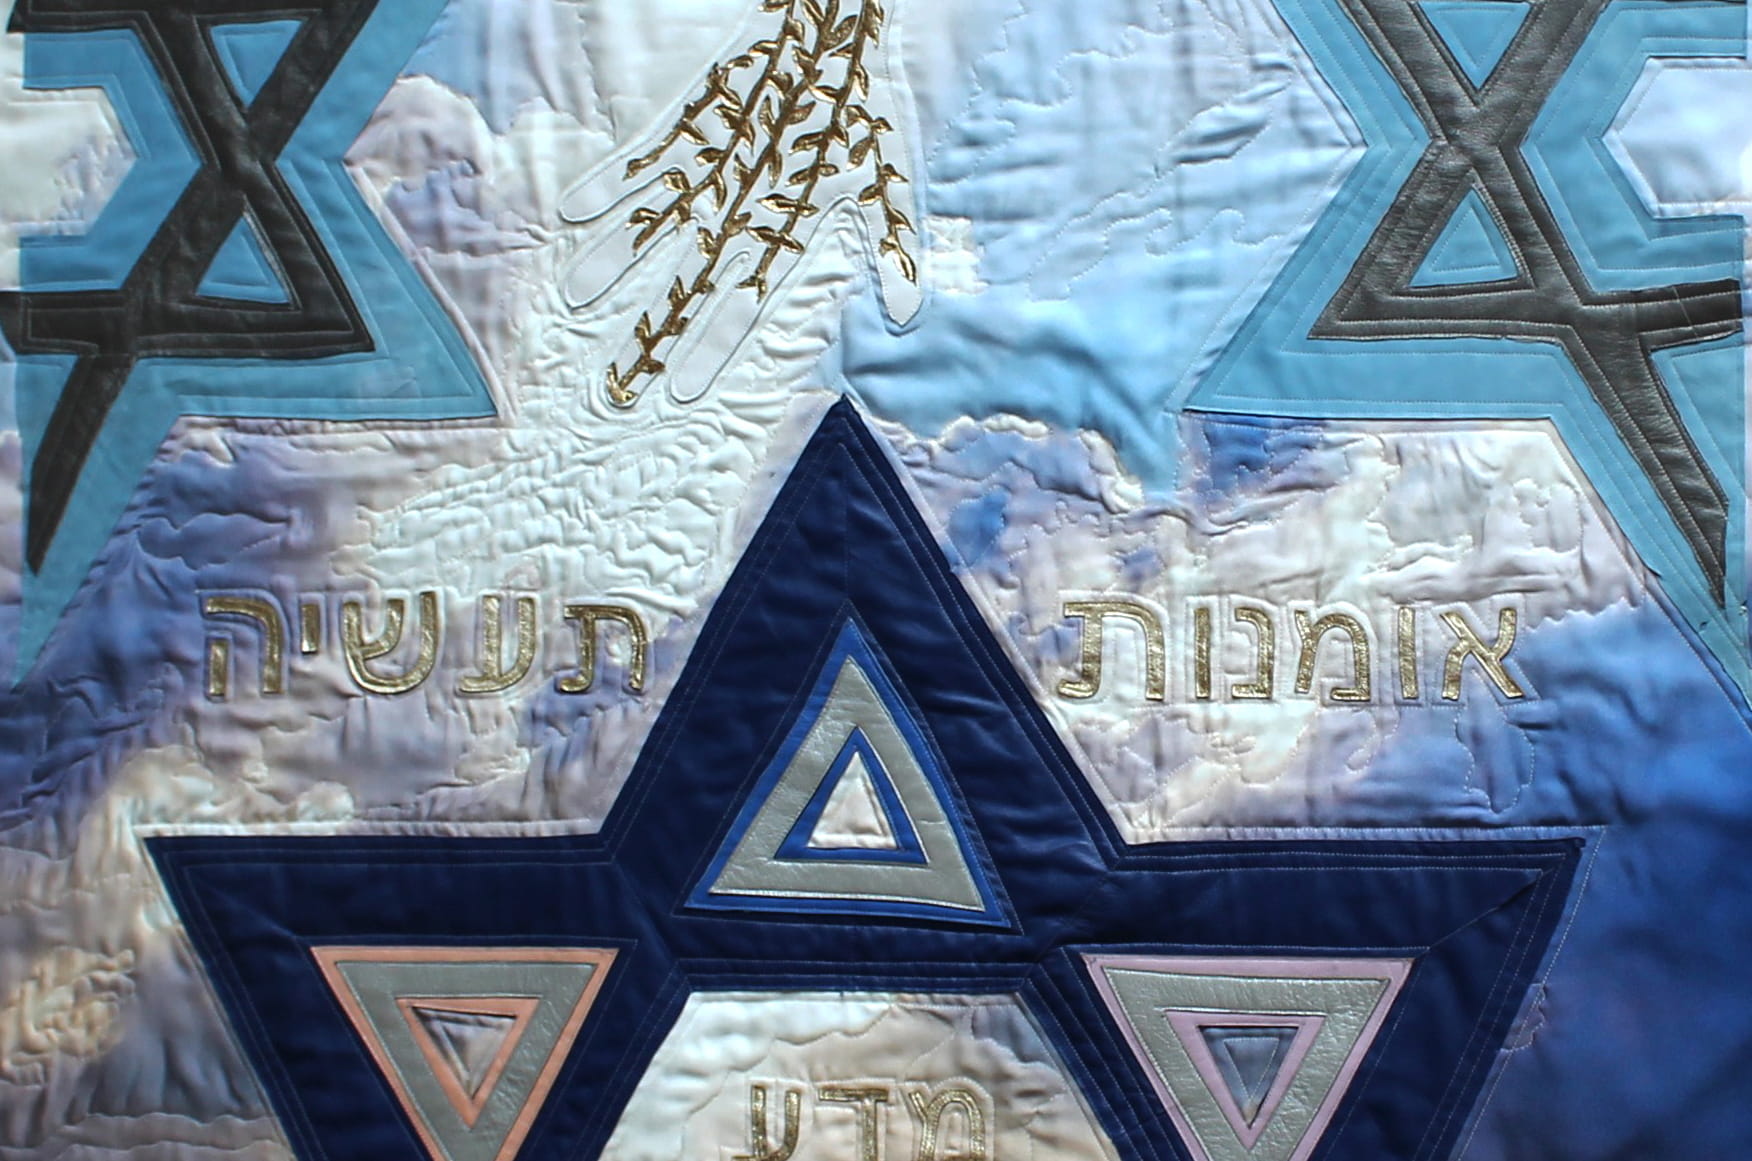 Artwork that depicts golden hand of God and blue star of David